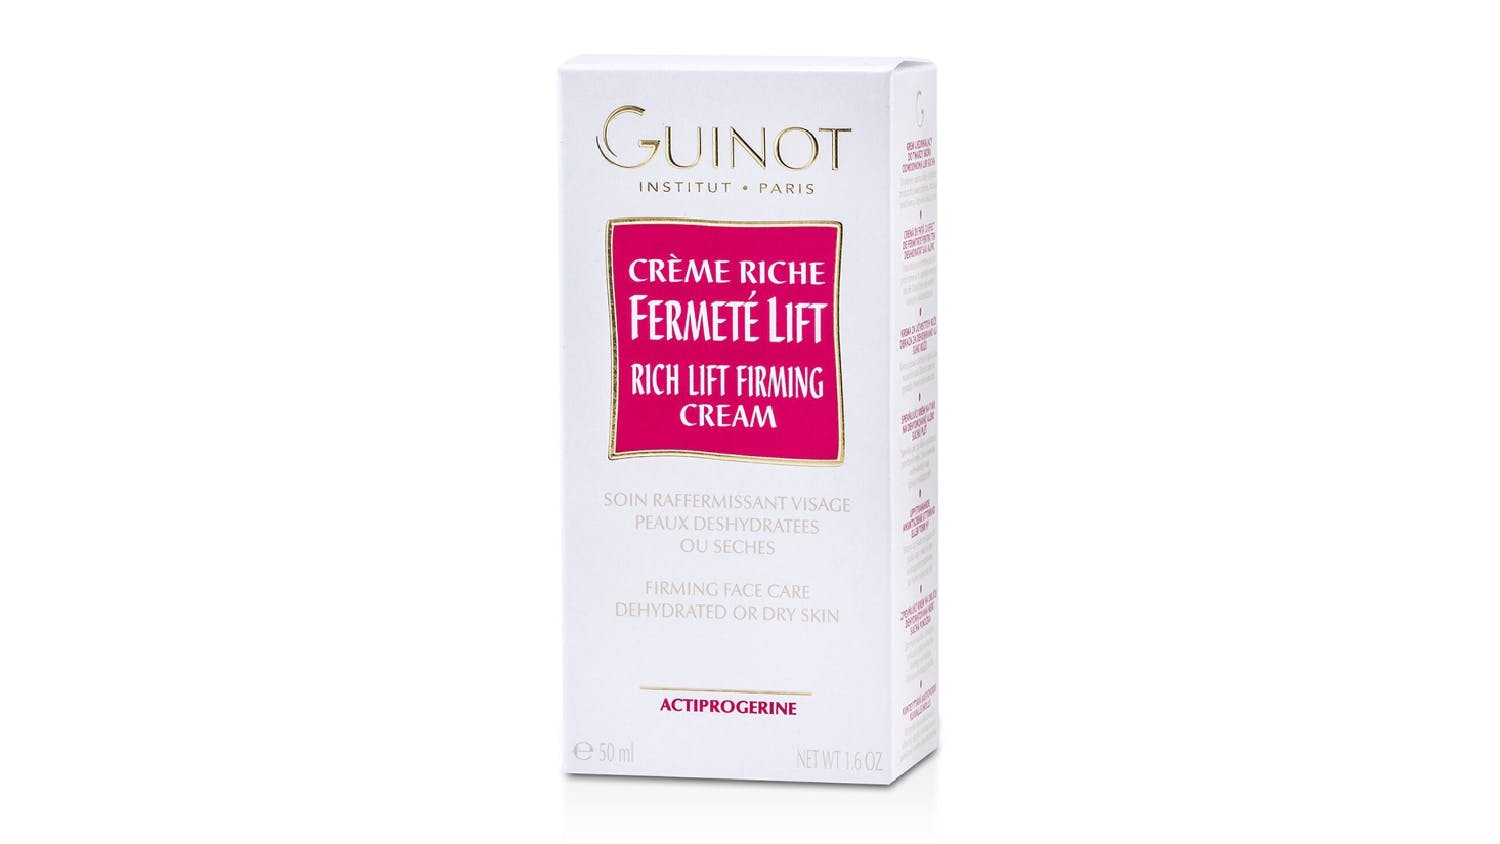 Guinot Rich Lift Firming Cream (For Dehydrated or Dry Skin) - 50ml/1.6oz